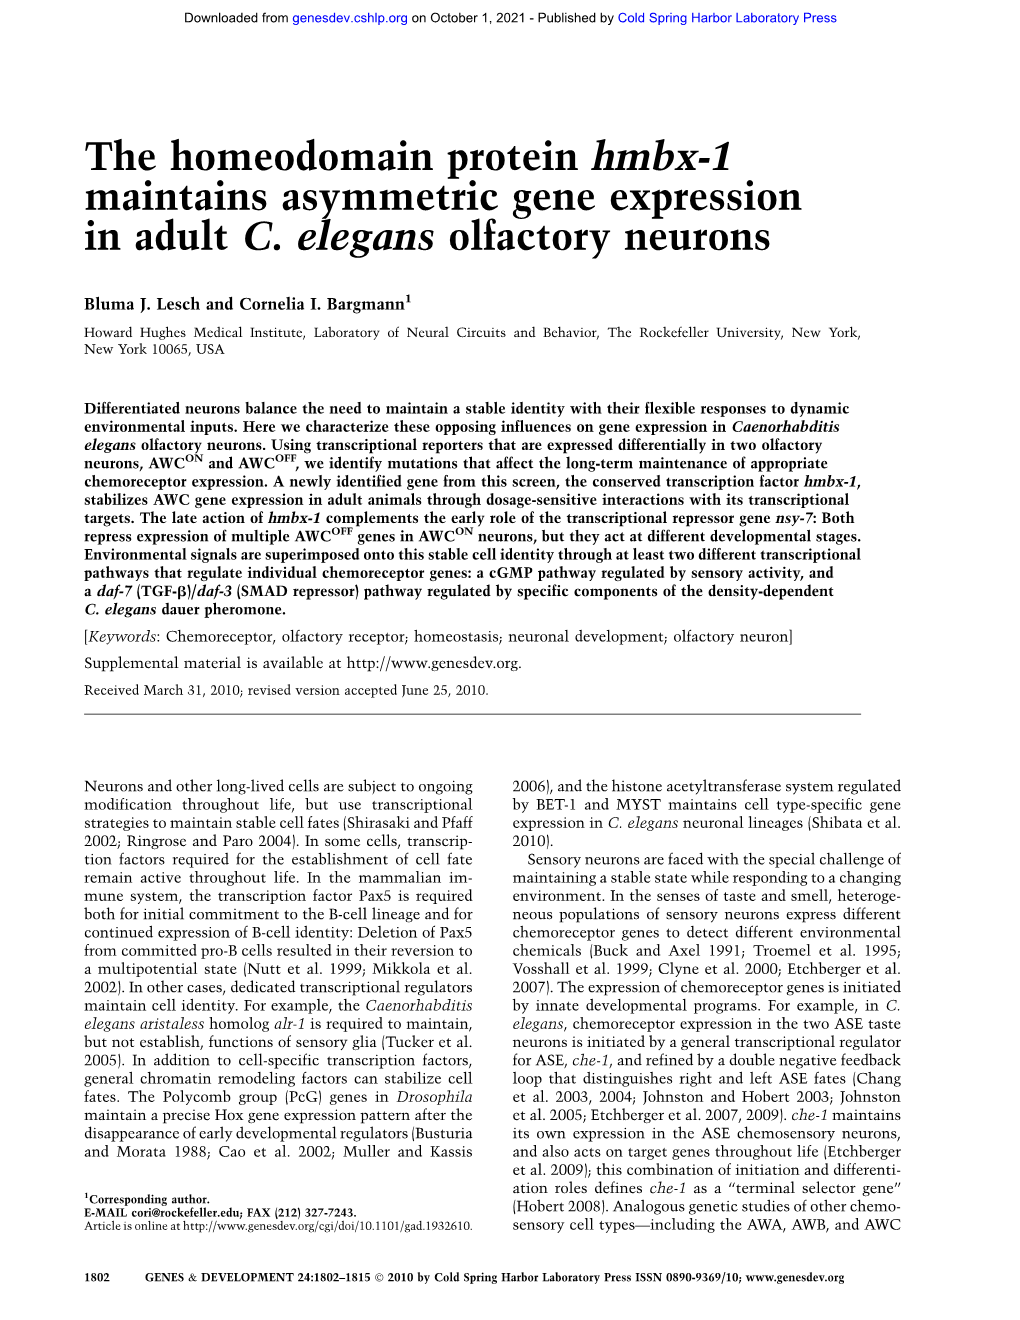 The Homeodomain Protein Hmbx-1 Maintains Asymmetric Gene Expression in Adult C